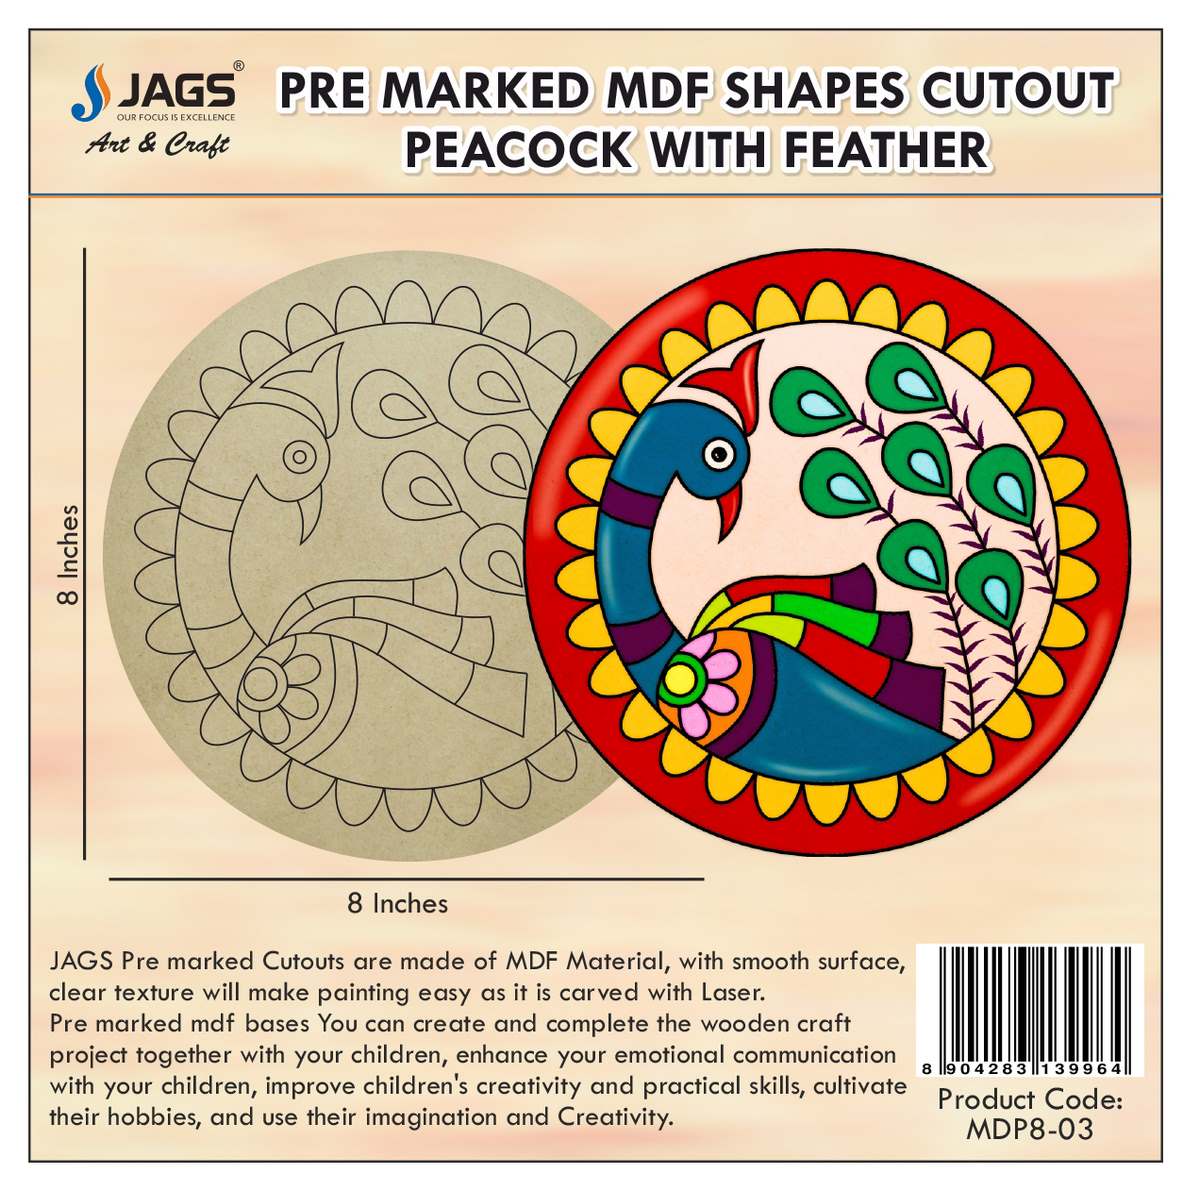 jags-mumbai MDF Pre-marked MDF Peacock Shapes Cutout with Feather for DIY Crafts, Pichwai painting